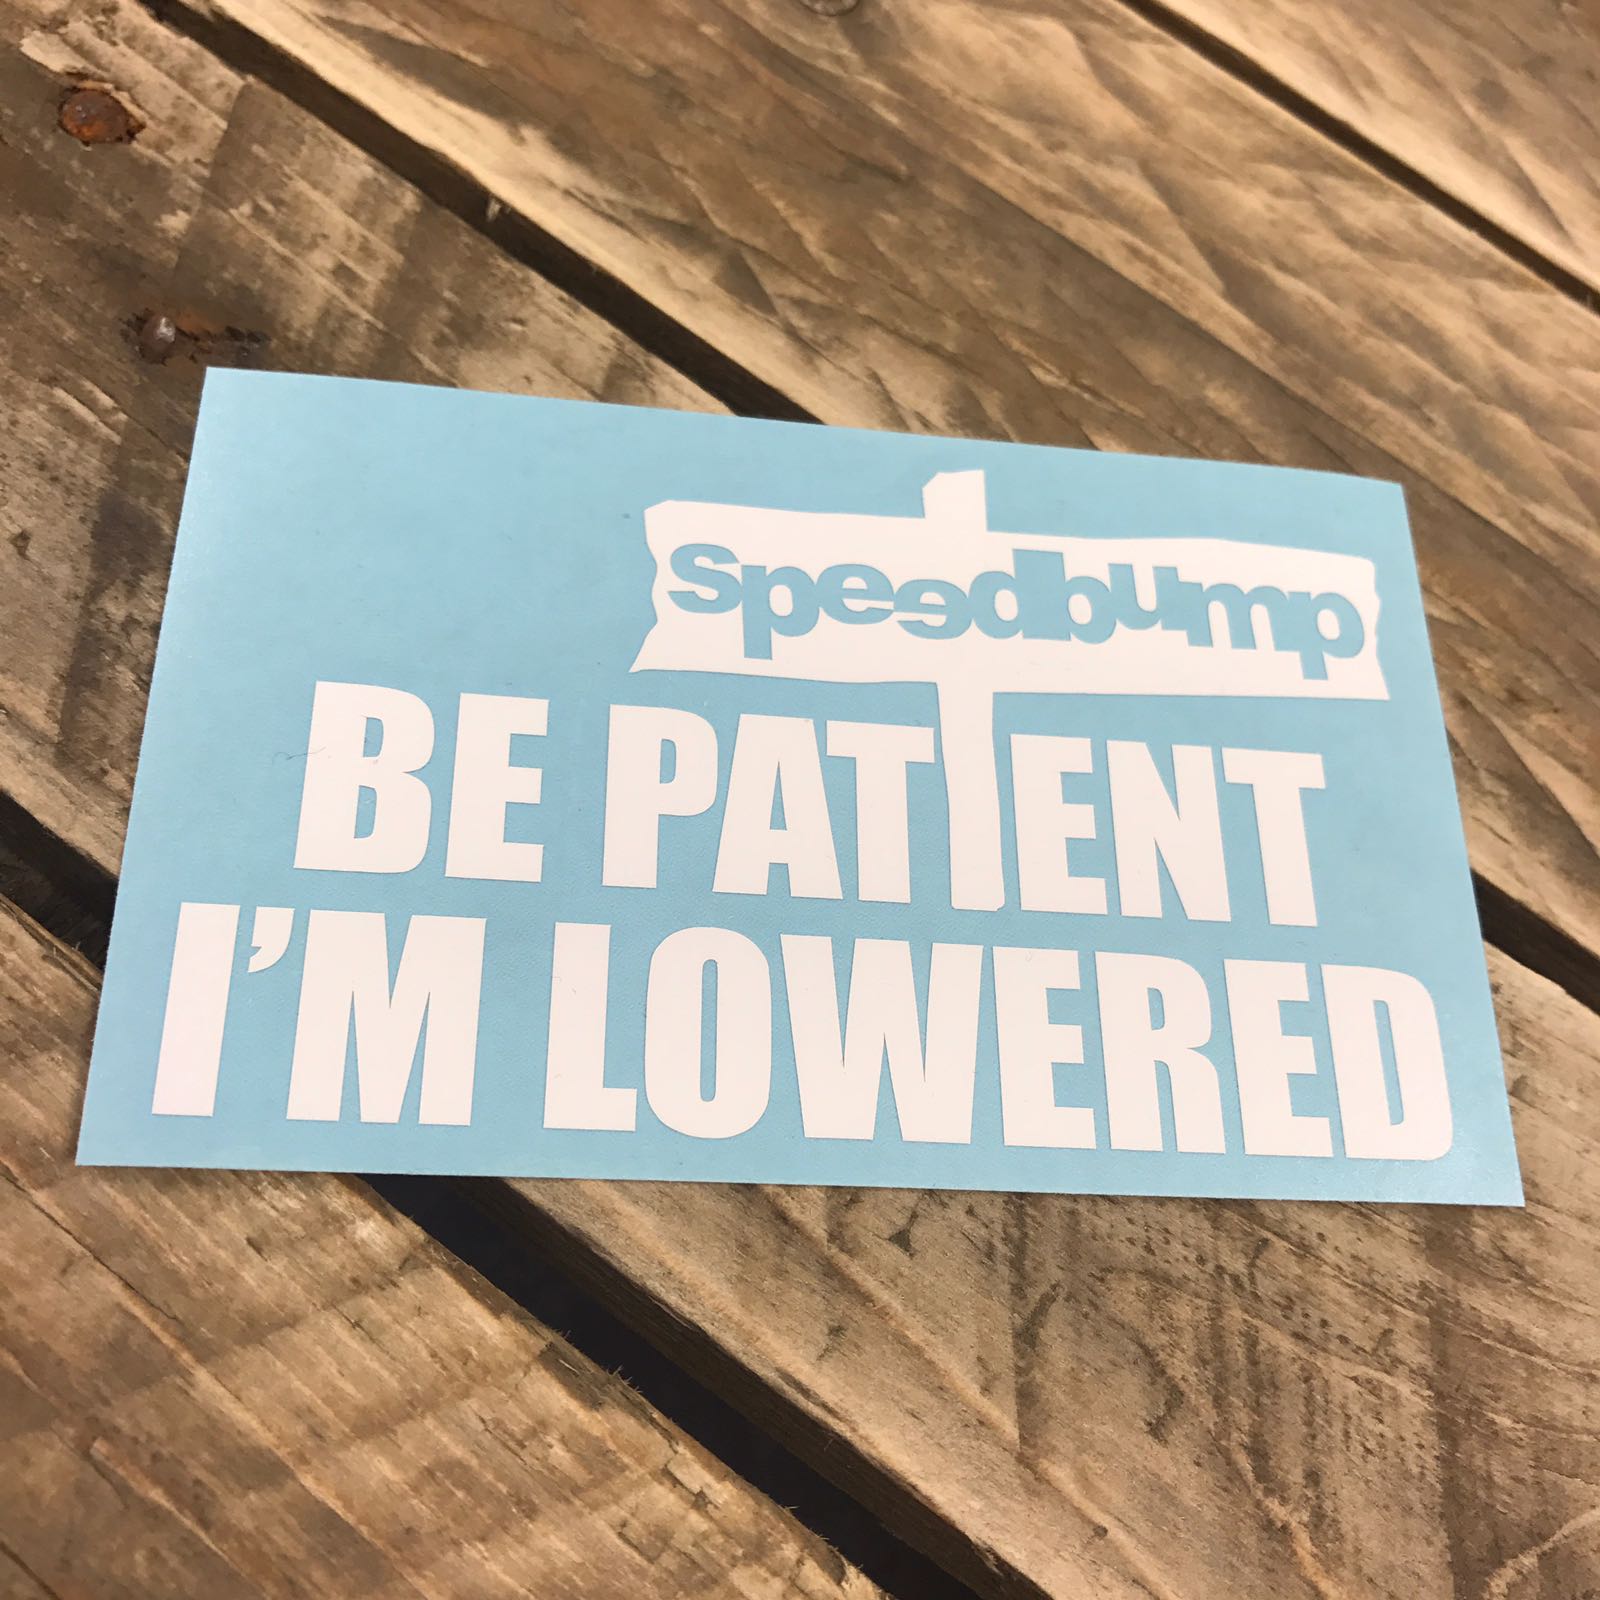 Be Patient, I'm Lowered